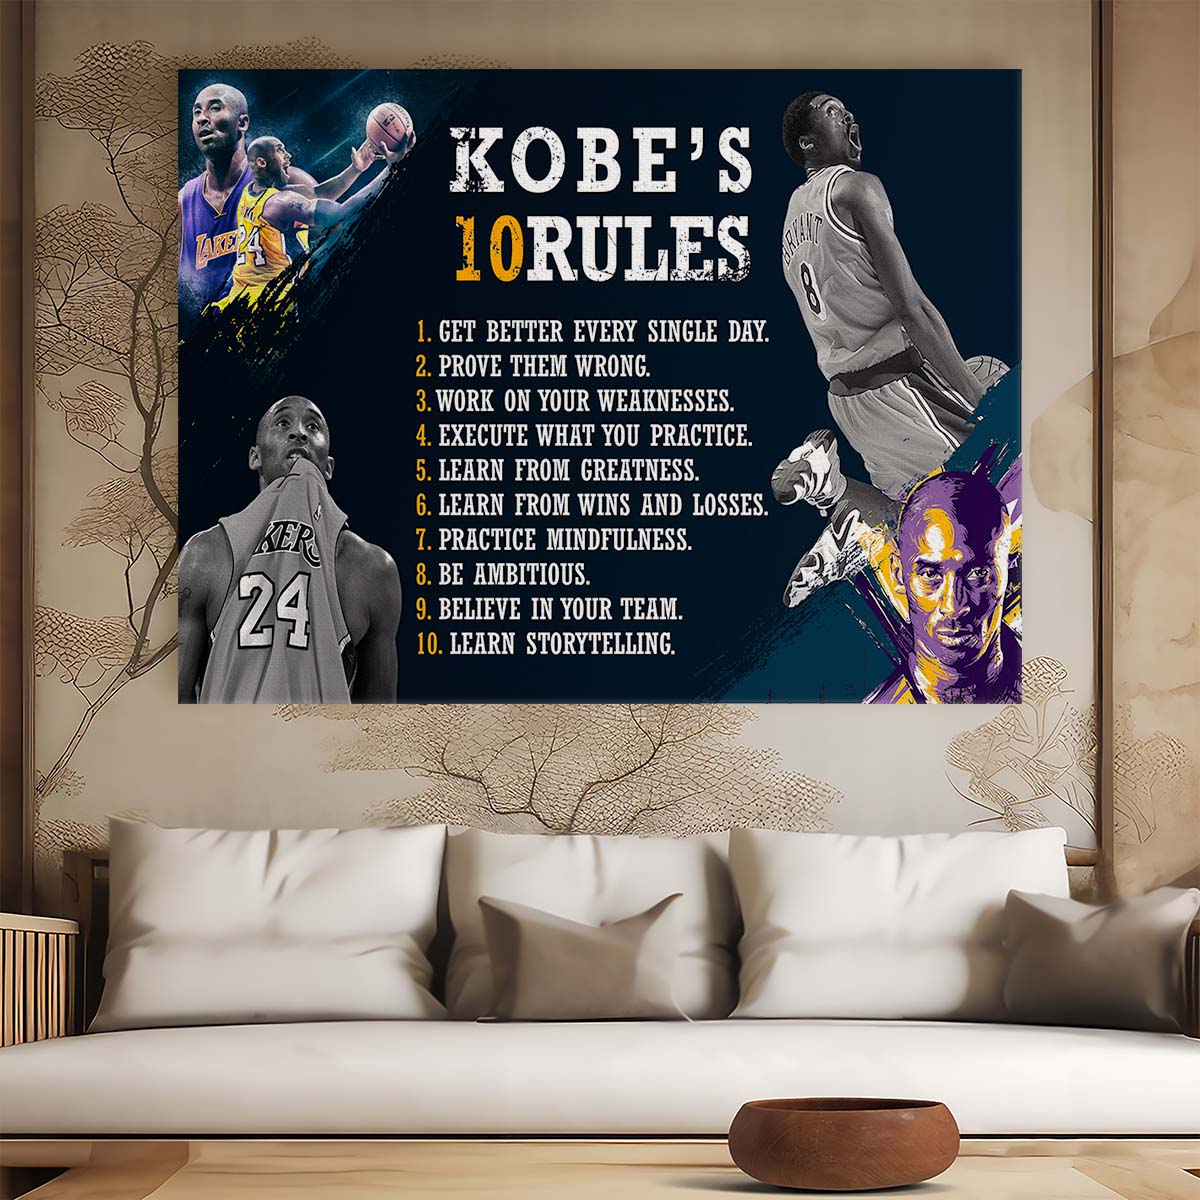 Kobe Bryant Ten Rules of Life Wall Art by Luxuriance Designs. Made in USA.